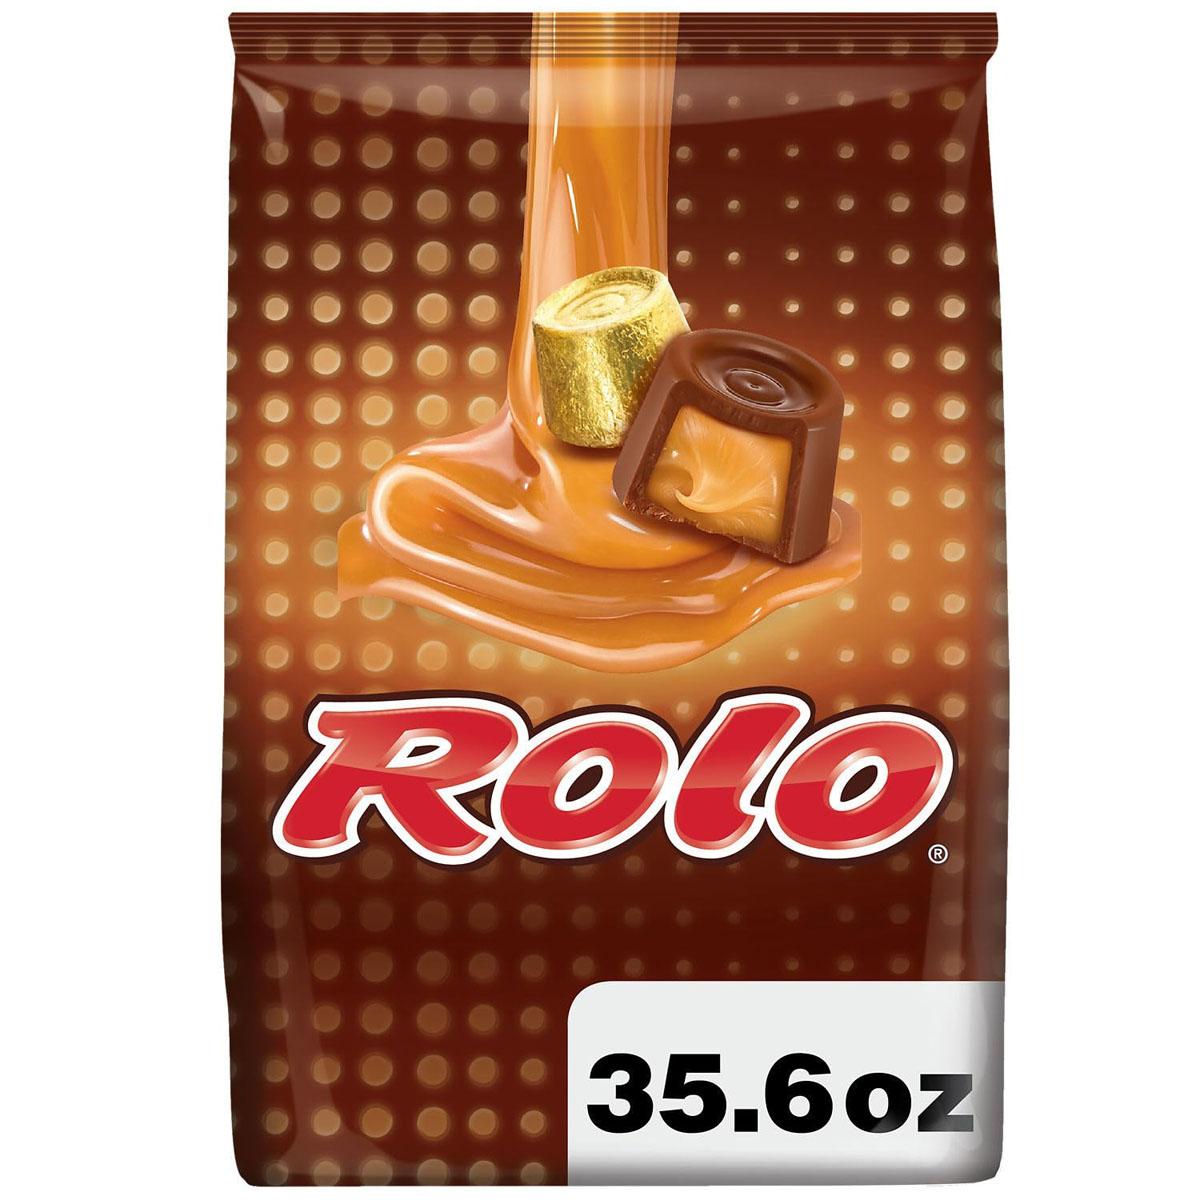 Rolo Rich Chocolate Caramel Candy for $8.60